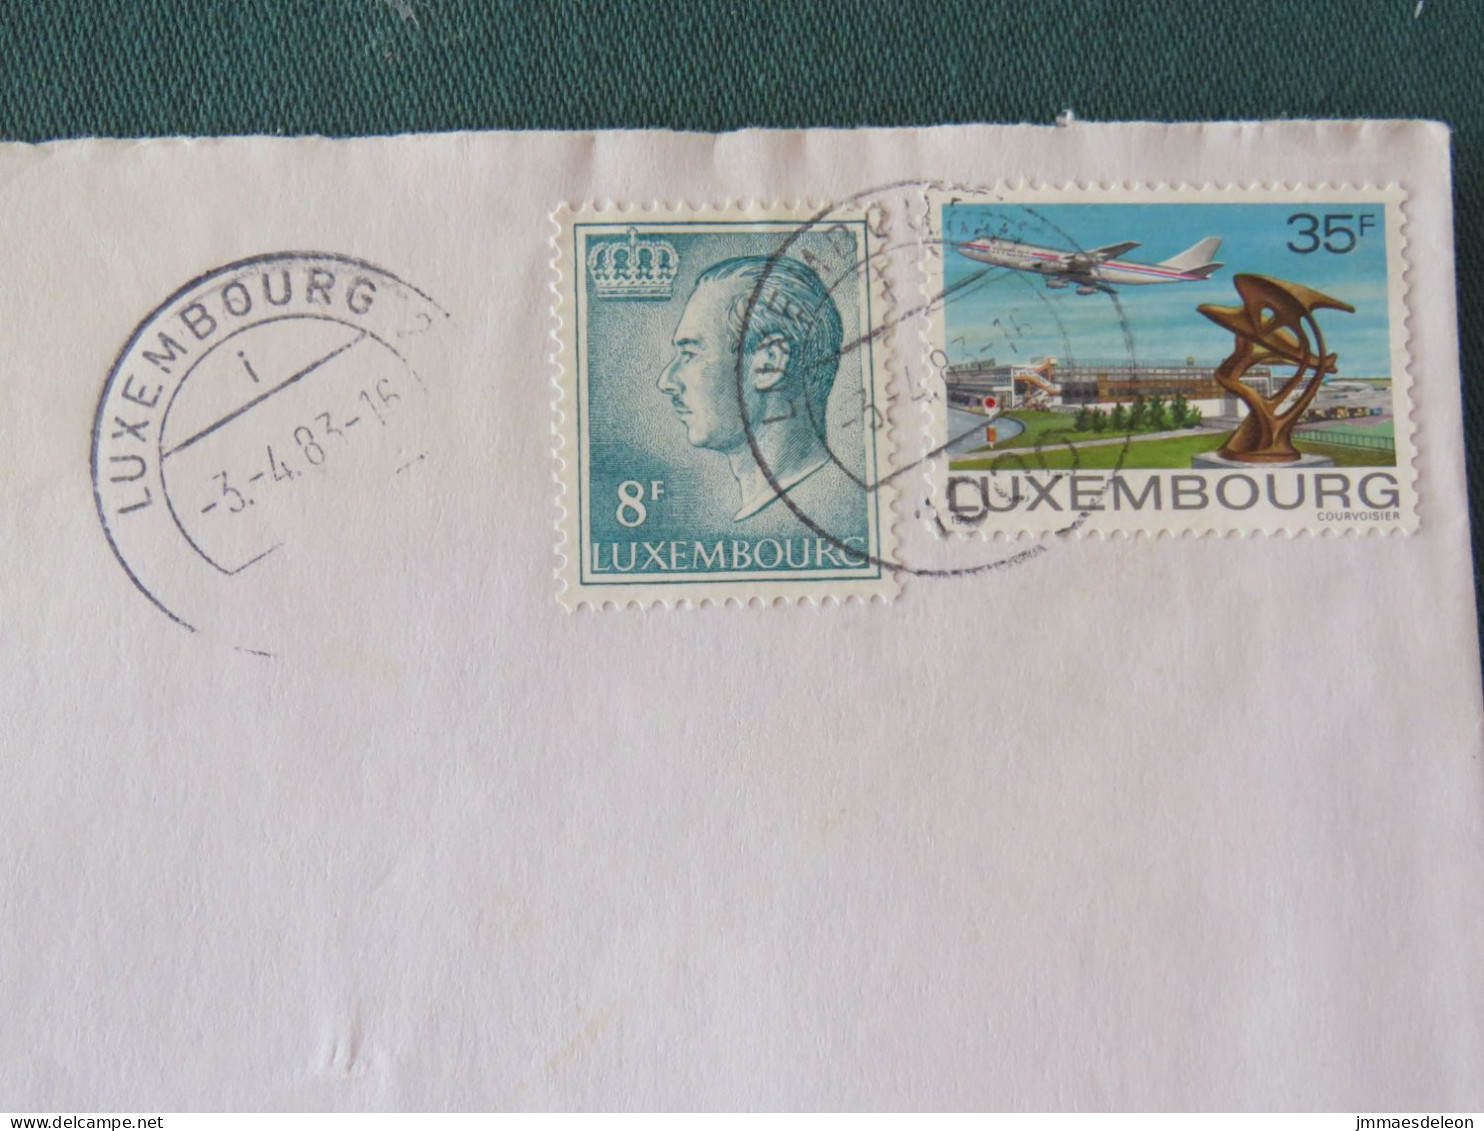 Luxembourg 1983 Registered Cover To Holland - Grand Duke - Plane  - Covers & Documents